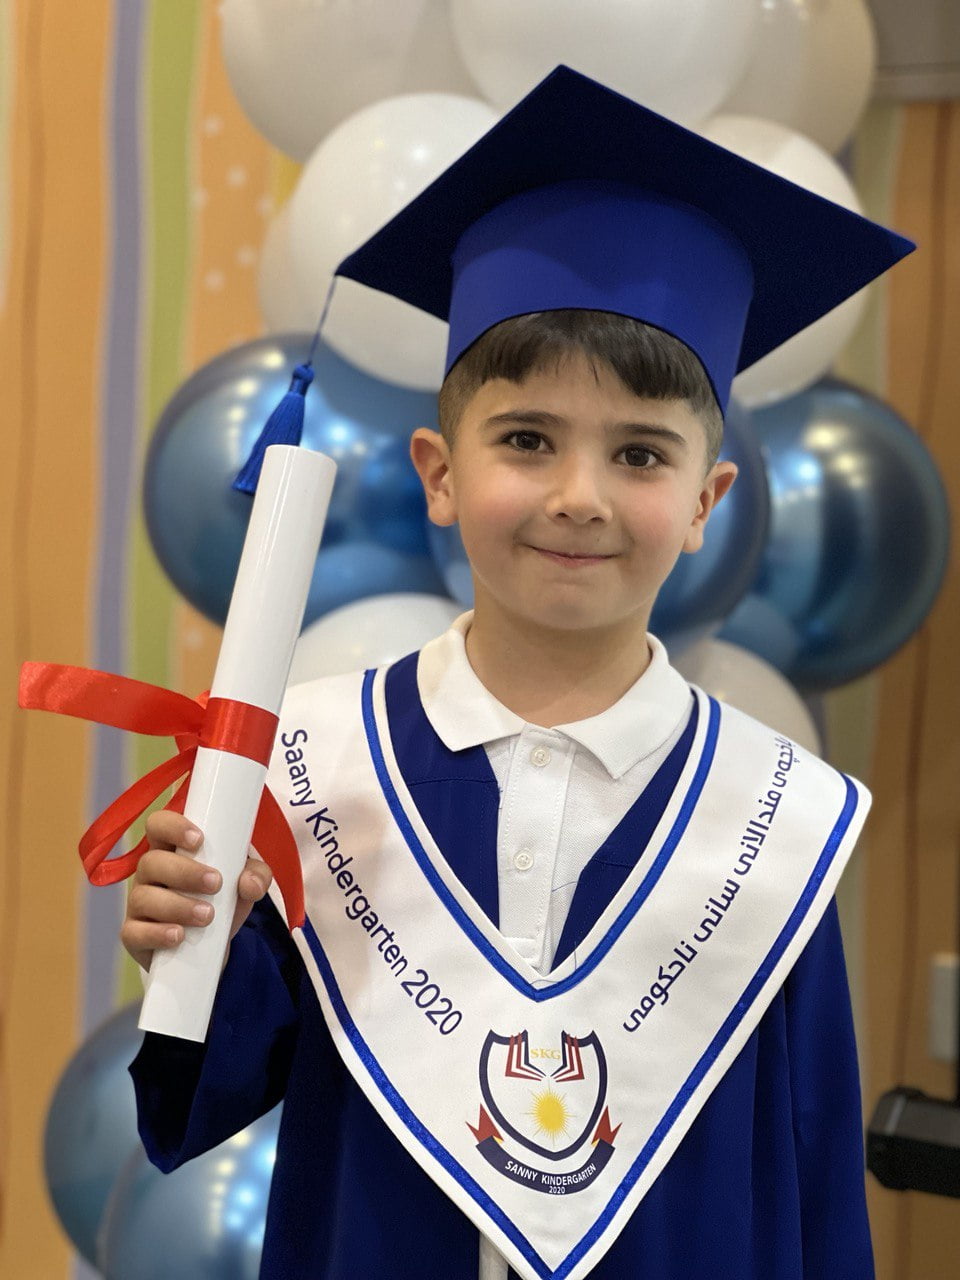 young boy, graduation gown